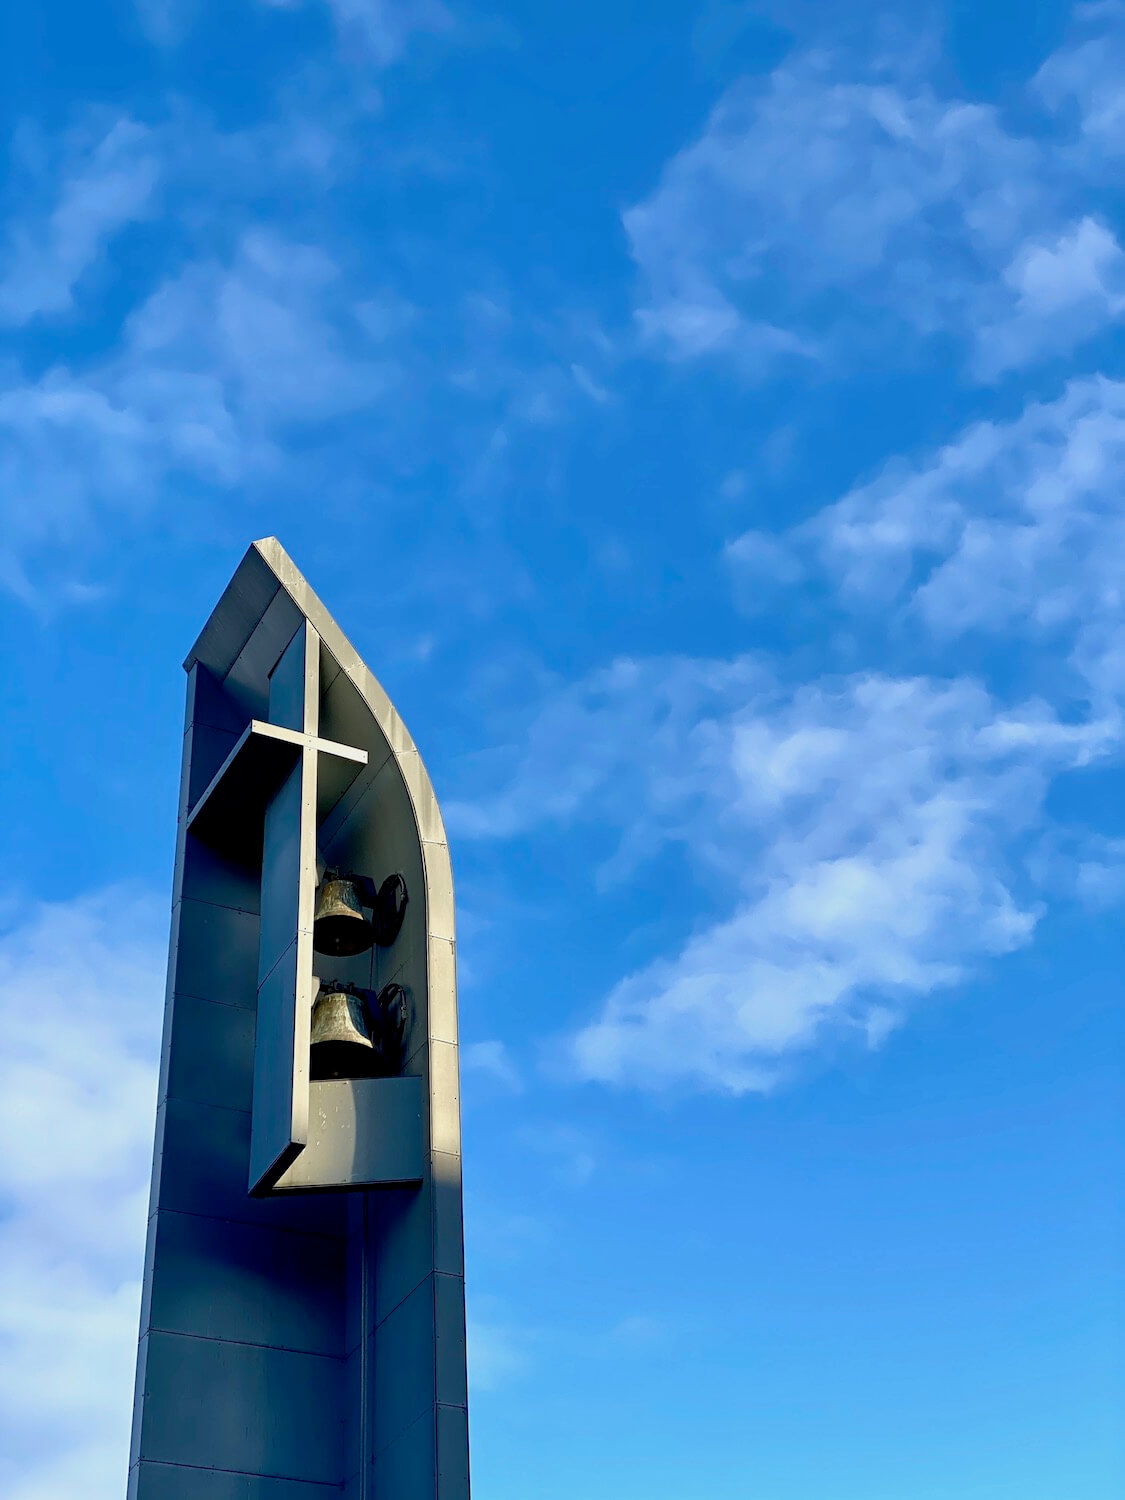 The bell tower of the Chapel of St. Ignatius reaches high up into the blue sky above the campus of Seattle University.  